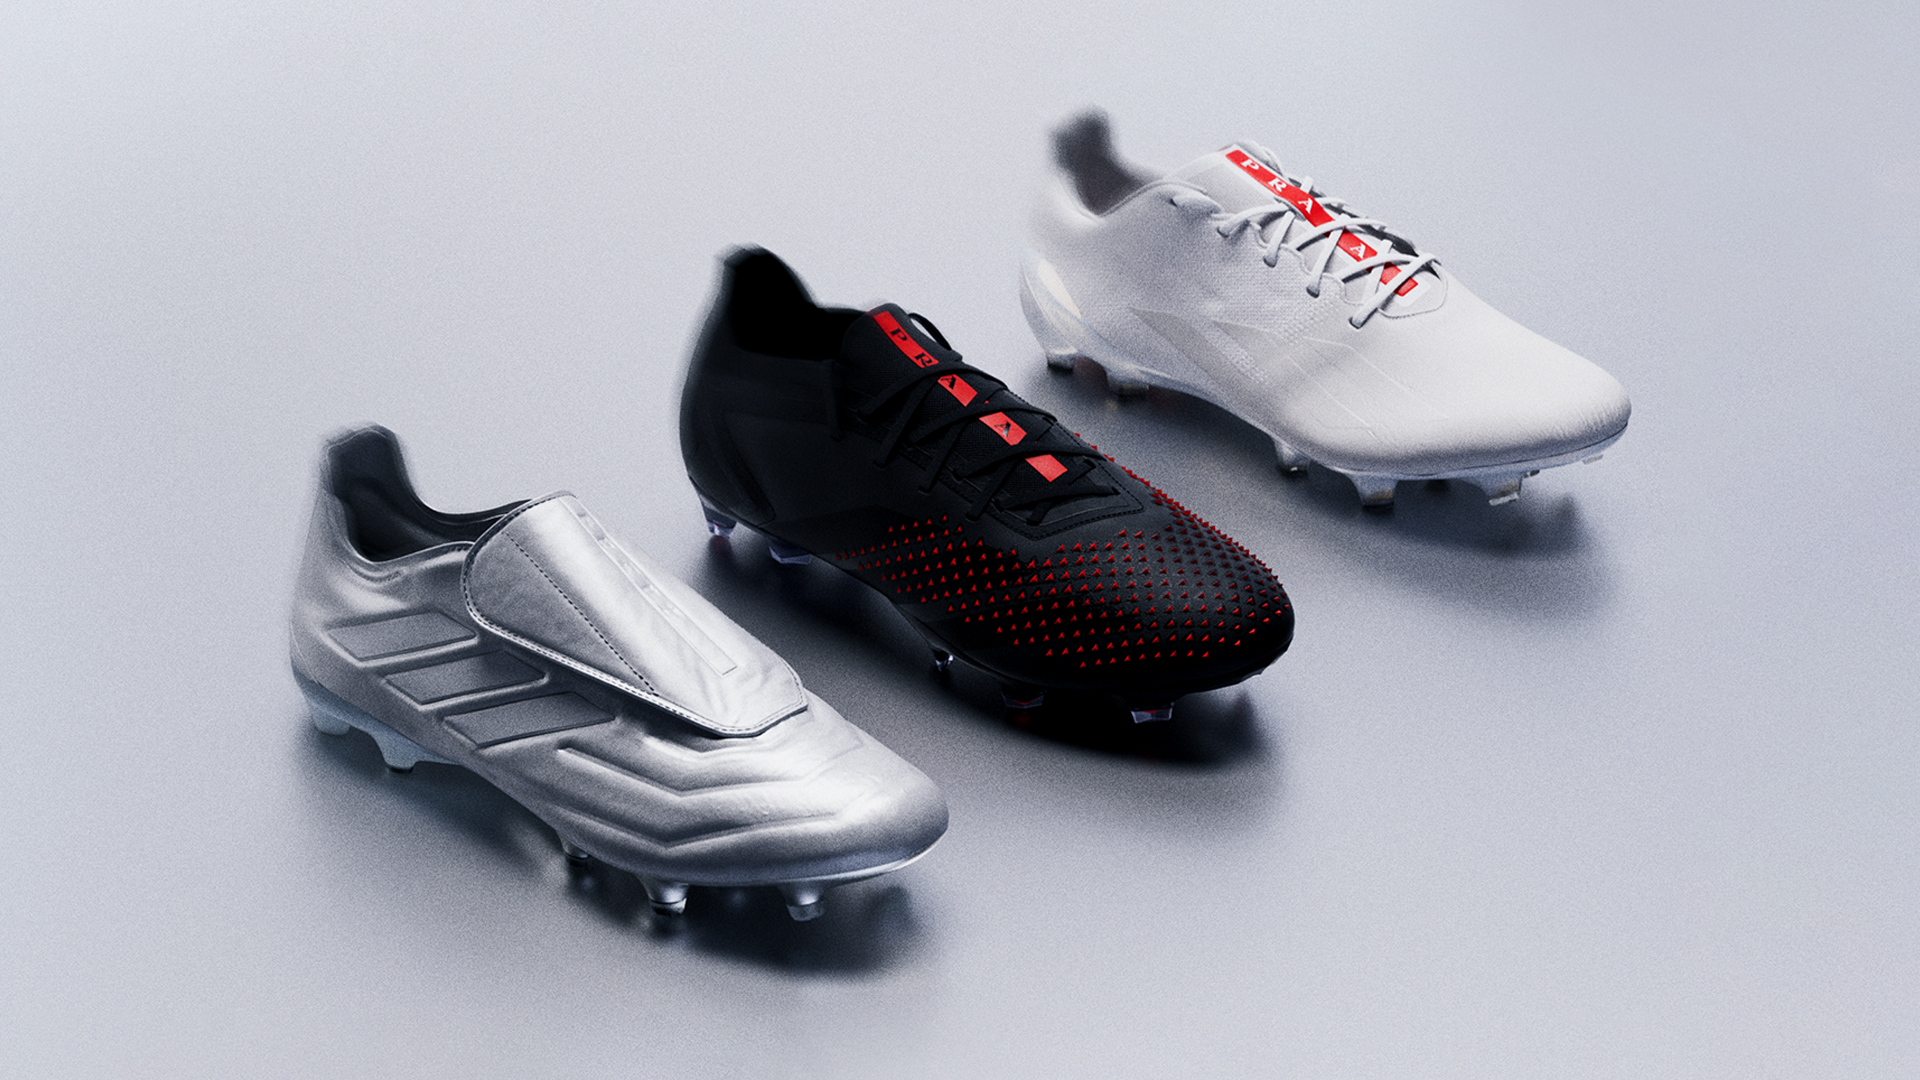 Catarina Macario Is Featured In The Newest Adidas X Prada First Football Boot Collection